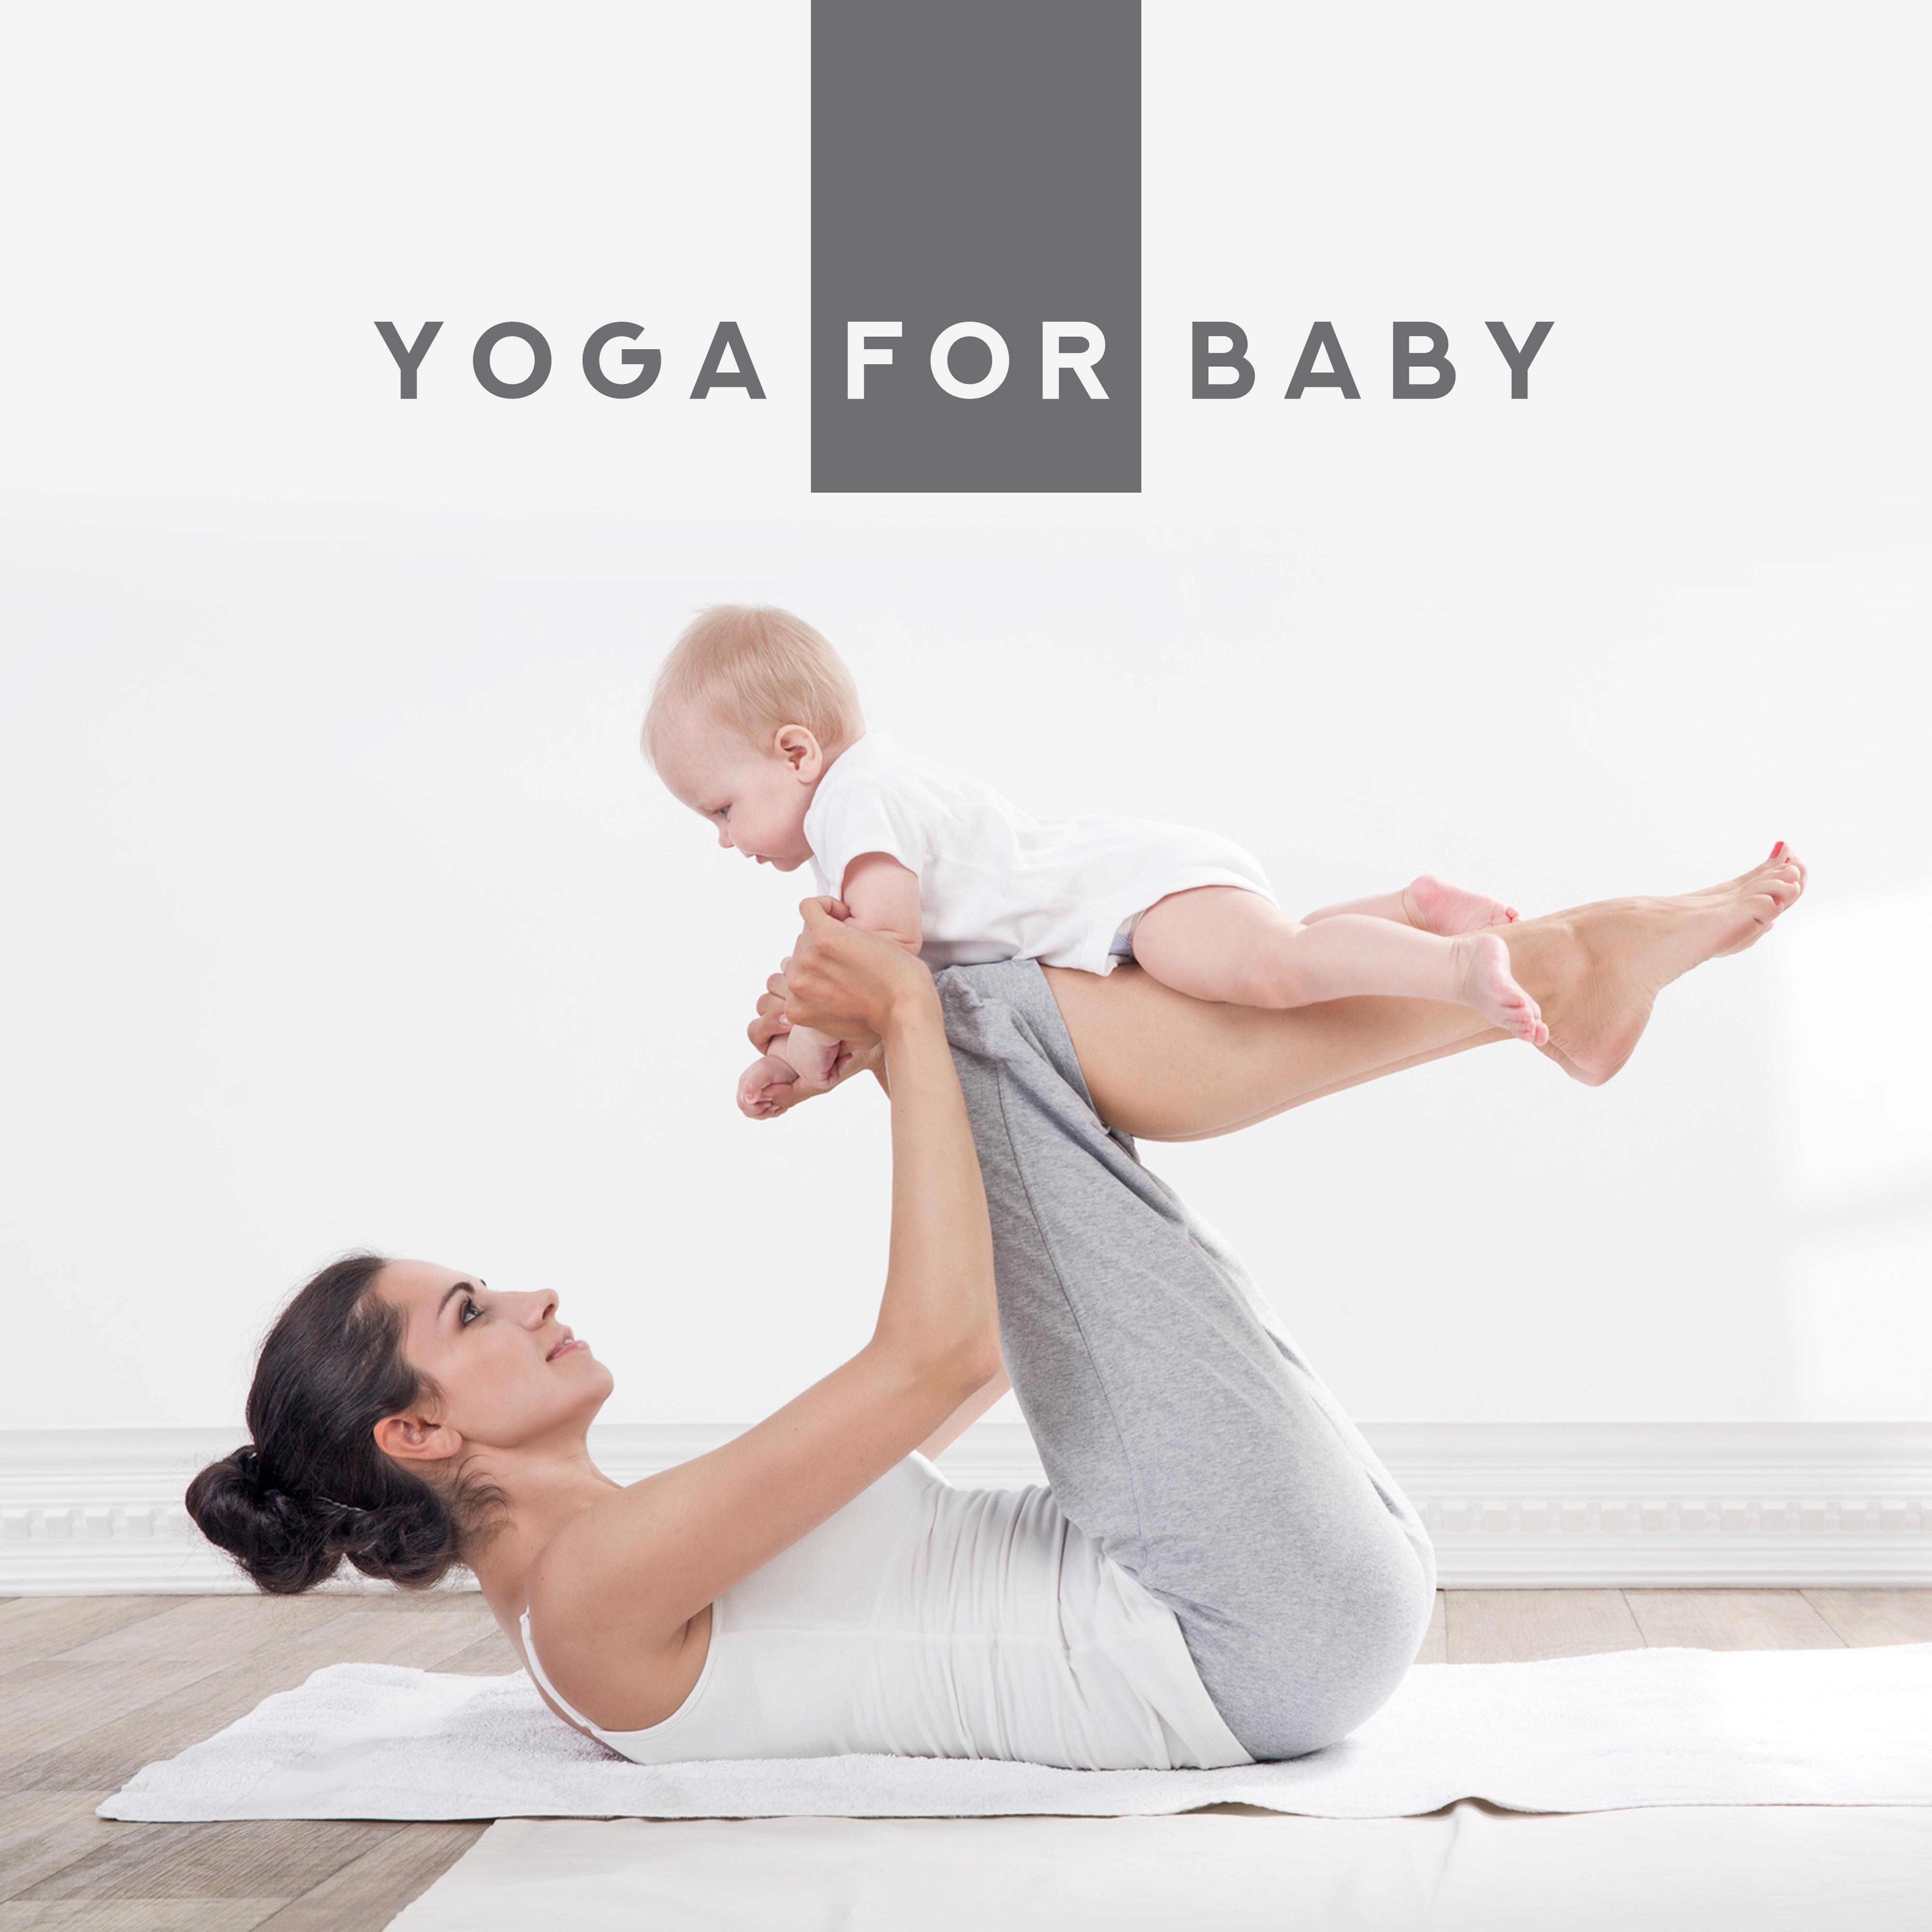 Yoga for Baby: Music for Children's Day, Yoga Training, Deep Relaxation for Kids, Deep Meditation, Baby Music, Calm Down, Chakra Balancing